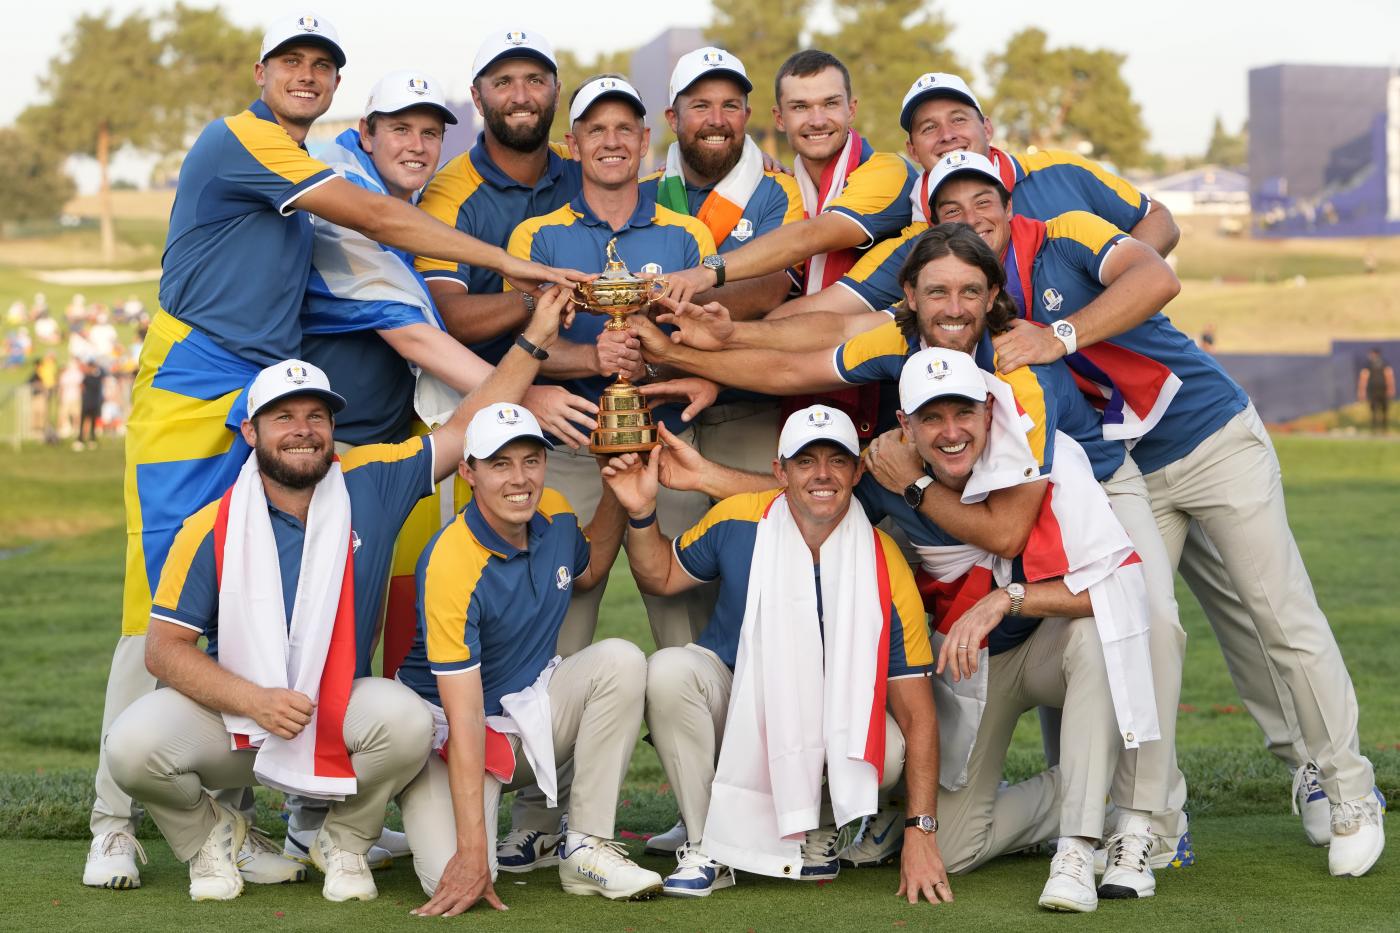 RYDER CUP 2023 EUROPA